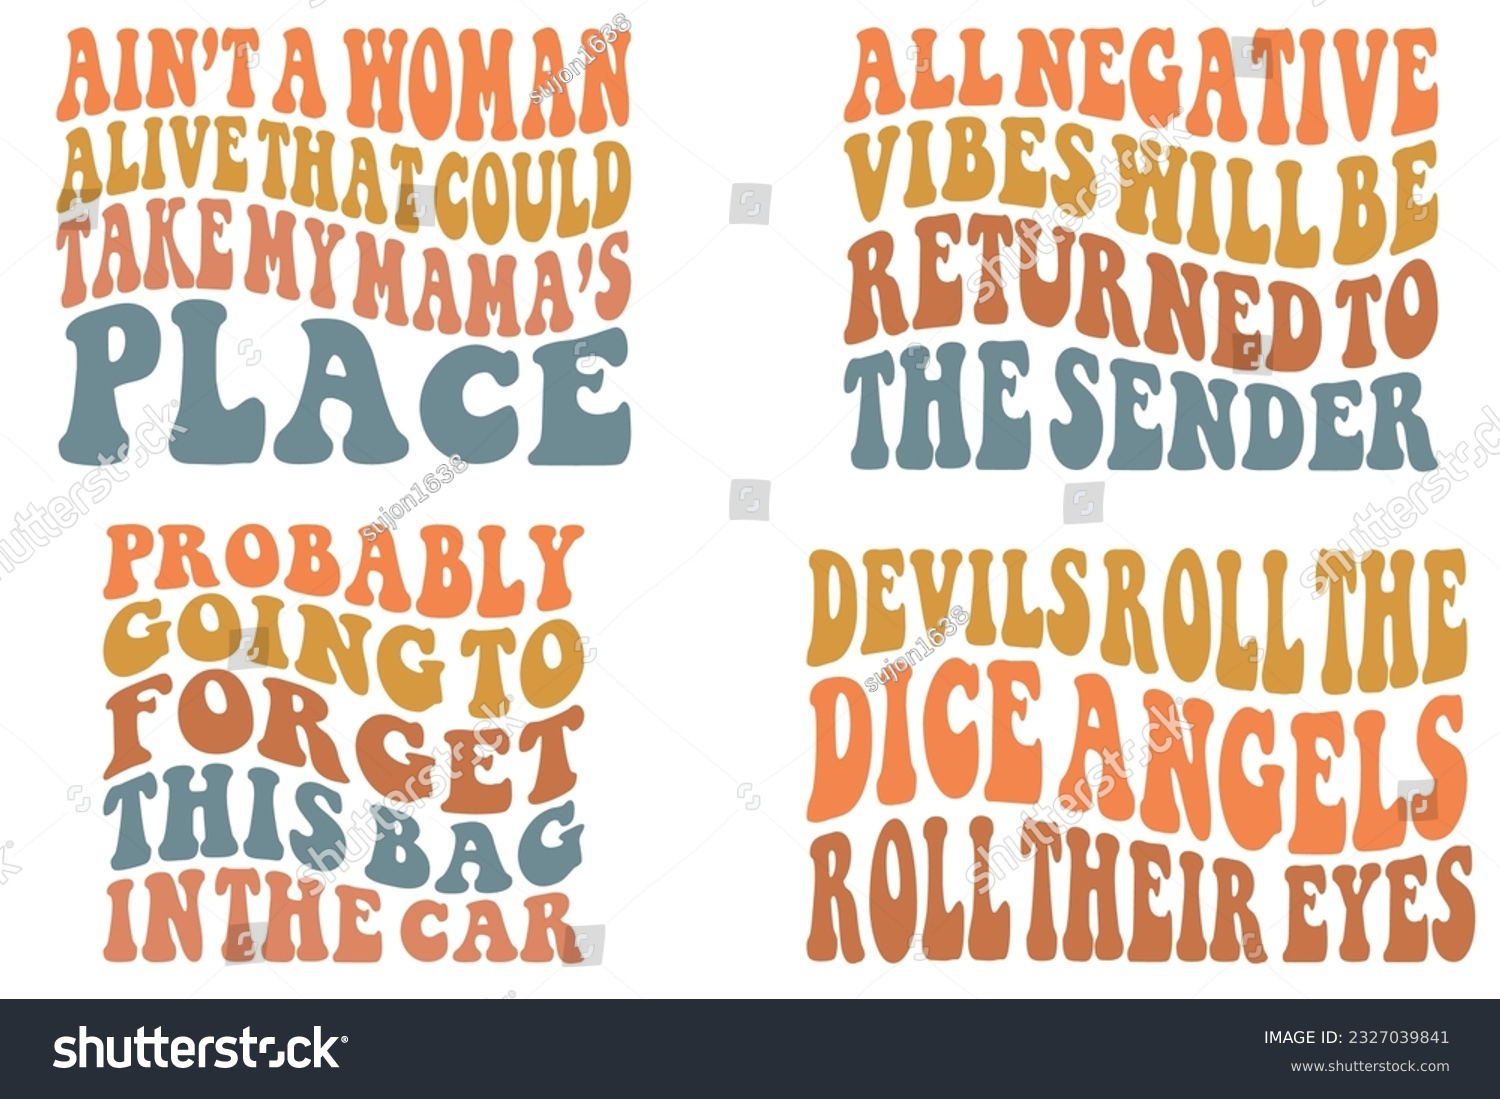 SVG of Ain’t A Woman Alive That Could Take My Mama’s Place, All Negative Vibes Will Be Returned To The Sender, Devils Roll the dice Angels roll their eyes, Probably Going To Forget This Bag In The Car SVG svg